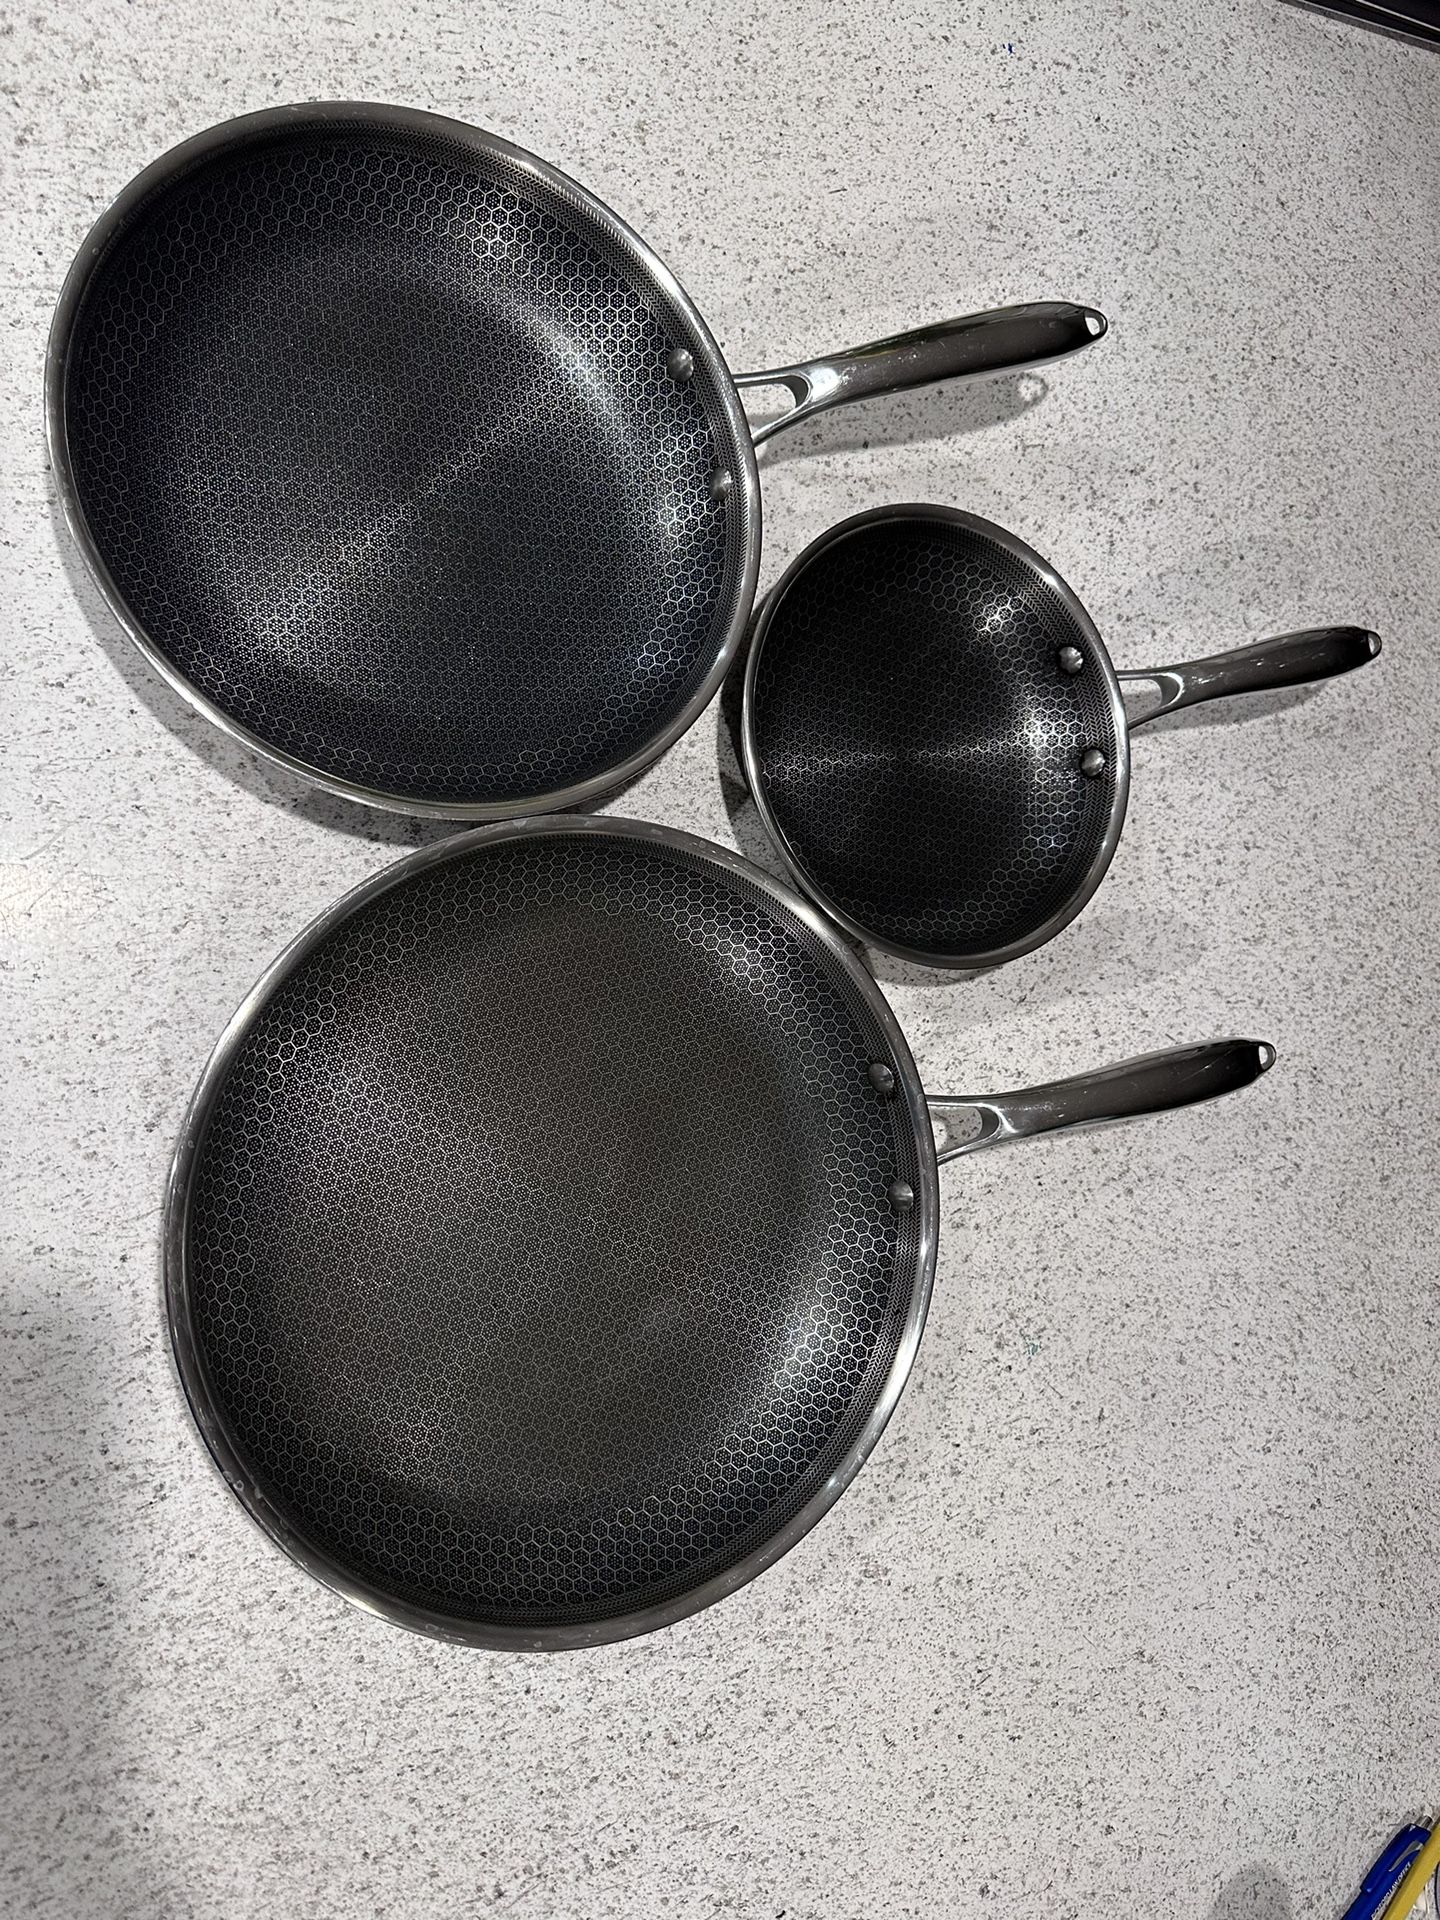 6pc HexClad Cookware Set for Sale in Fontana, CA - OfferUp